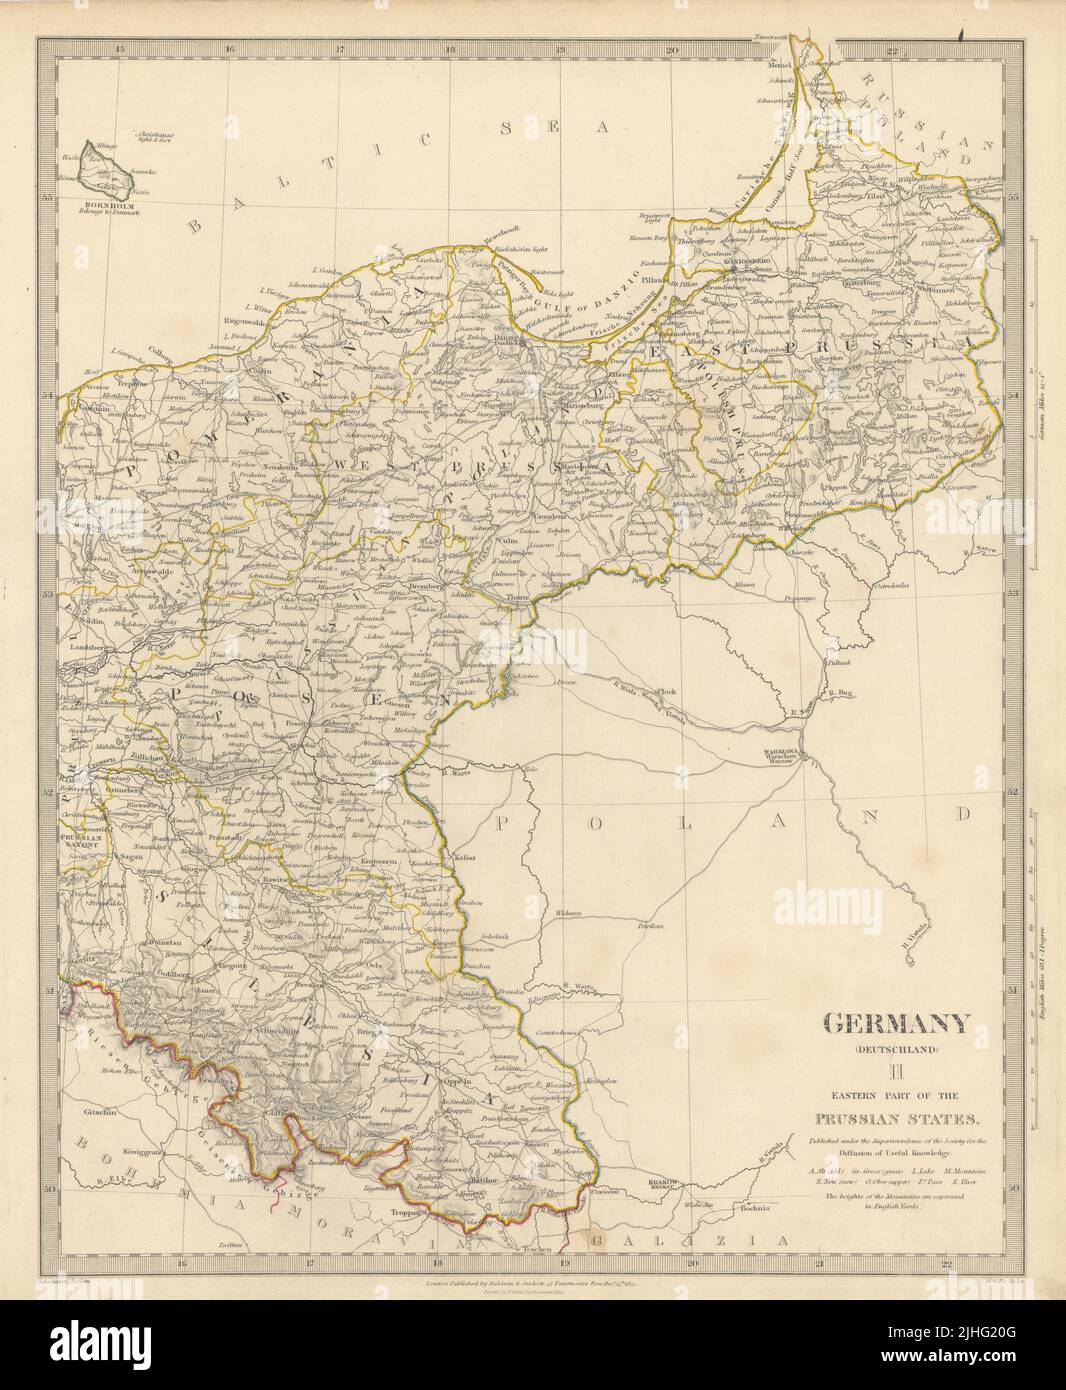 ALLEMAGNE DEUTSCHLAND.Eastern Prussian States.Silesia;Pomerania.SDUK 1844 map Banque D'Images